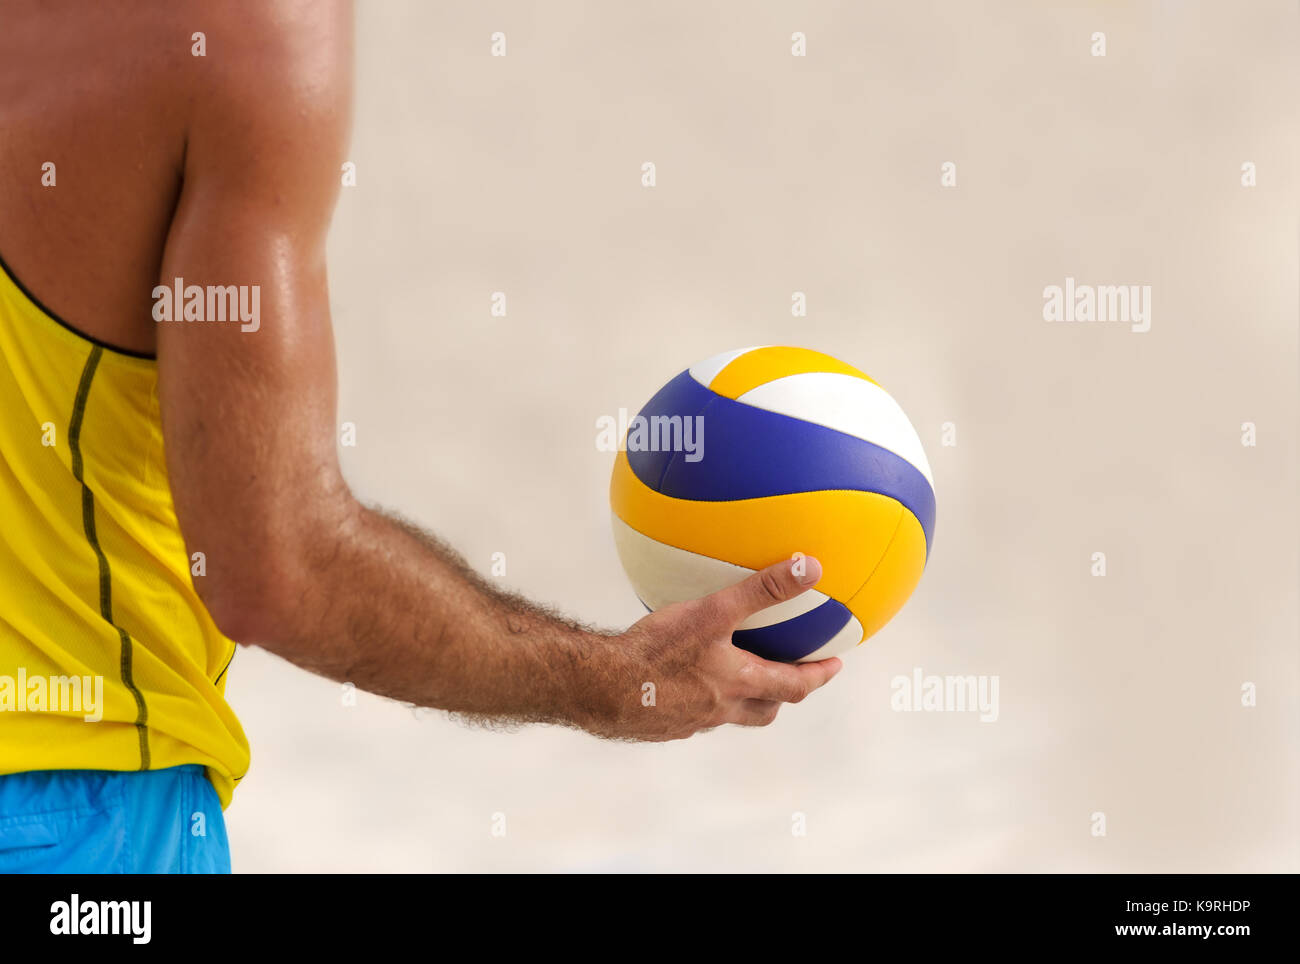 Volleyball is a male volleyball player getting ready to serve the ball. Stock Photo